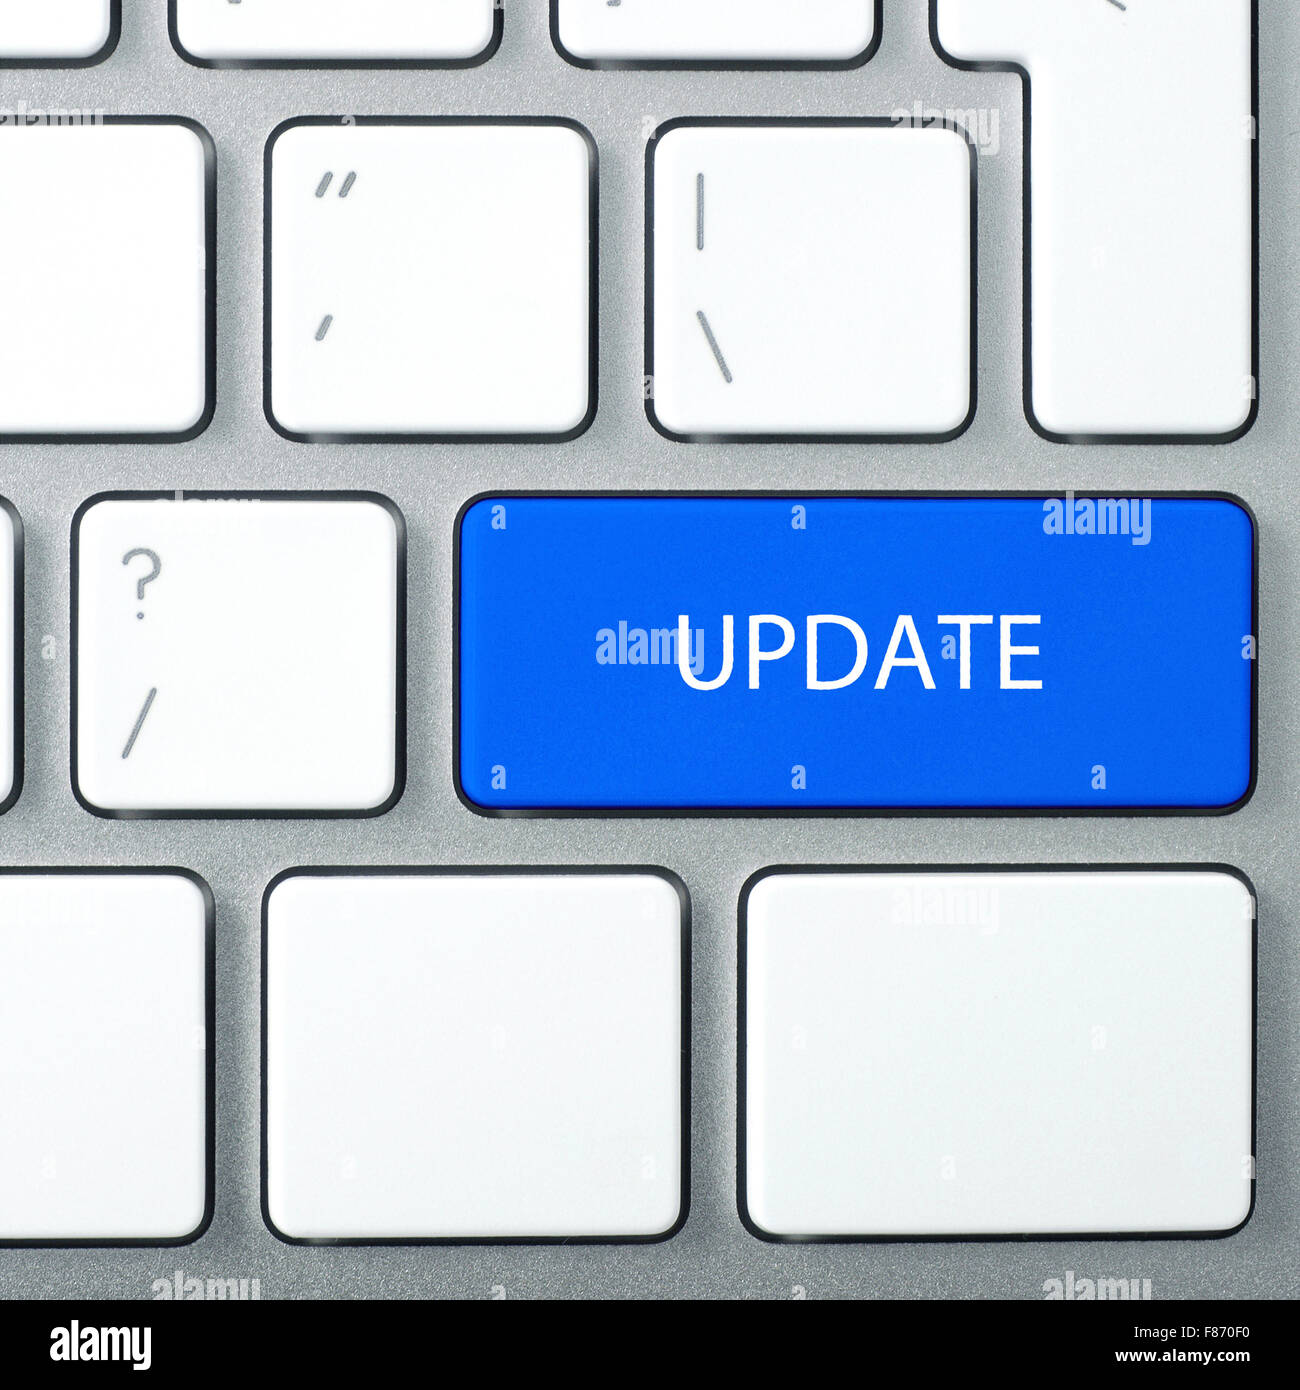 Laptop keyboard and blue key 'UPDATE' on it. Square format. Stock Photo